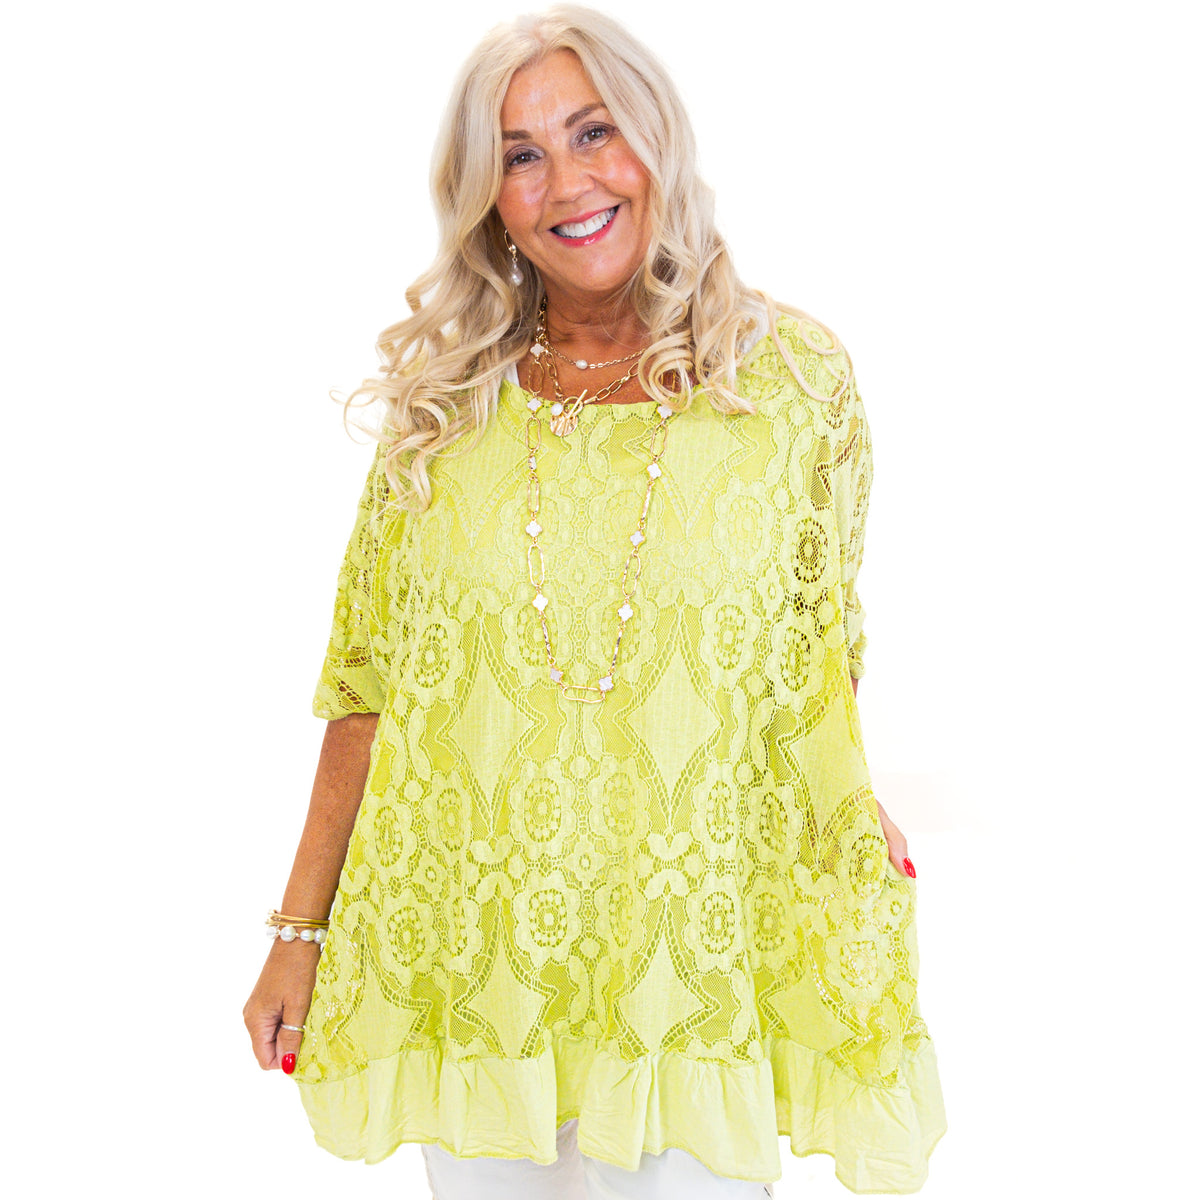 Lace Top With Frill Hem